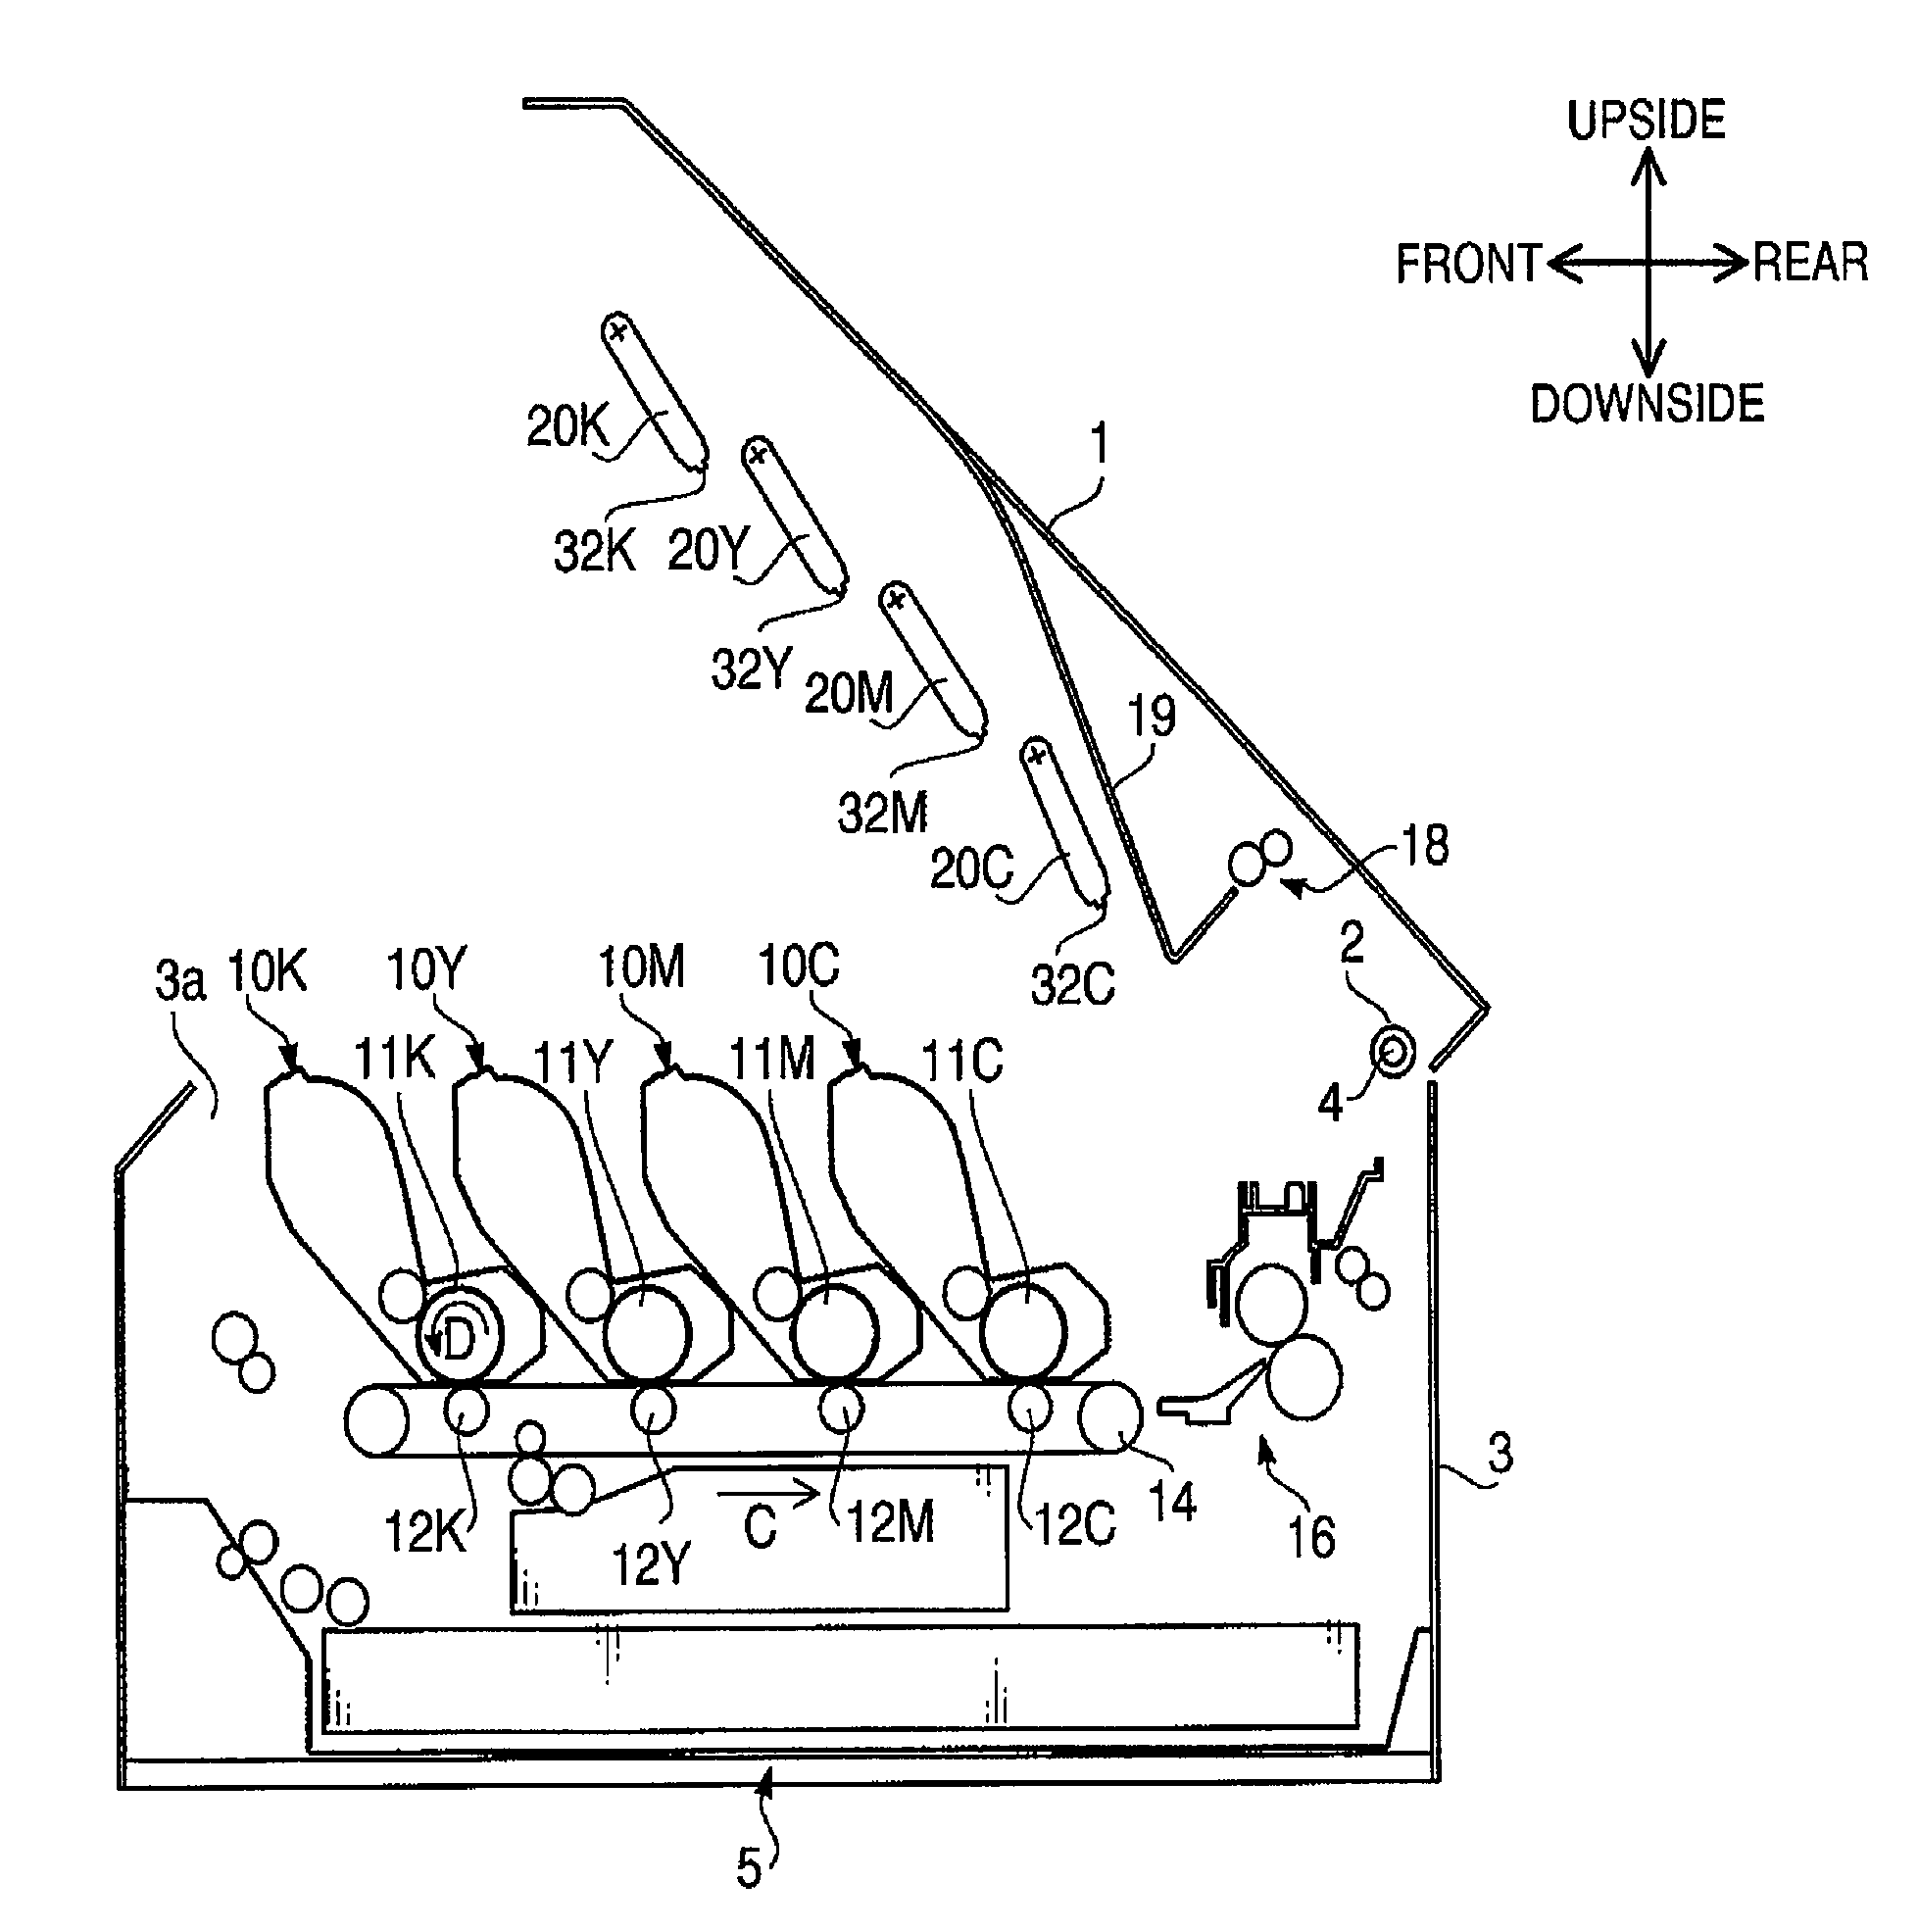 Image forming device having exposure unit provided to first device body rotatably joined to second device body